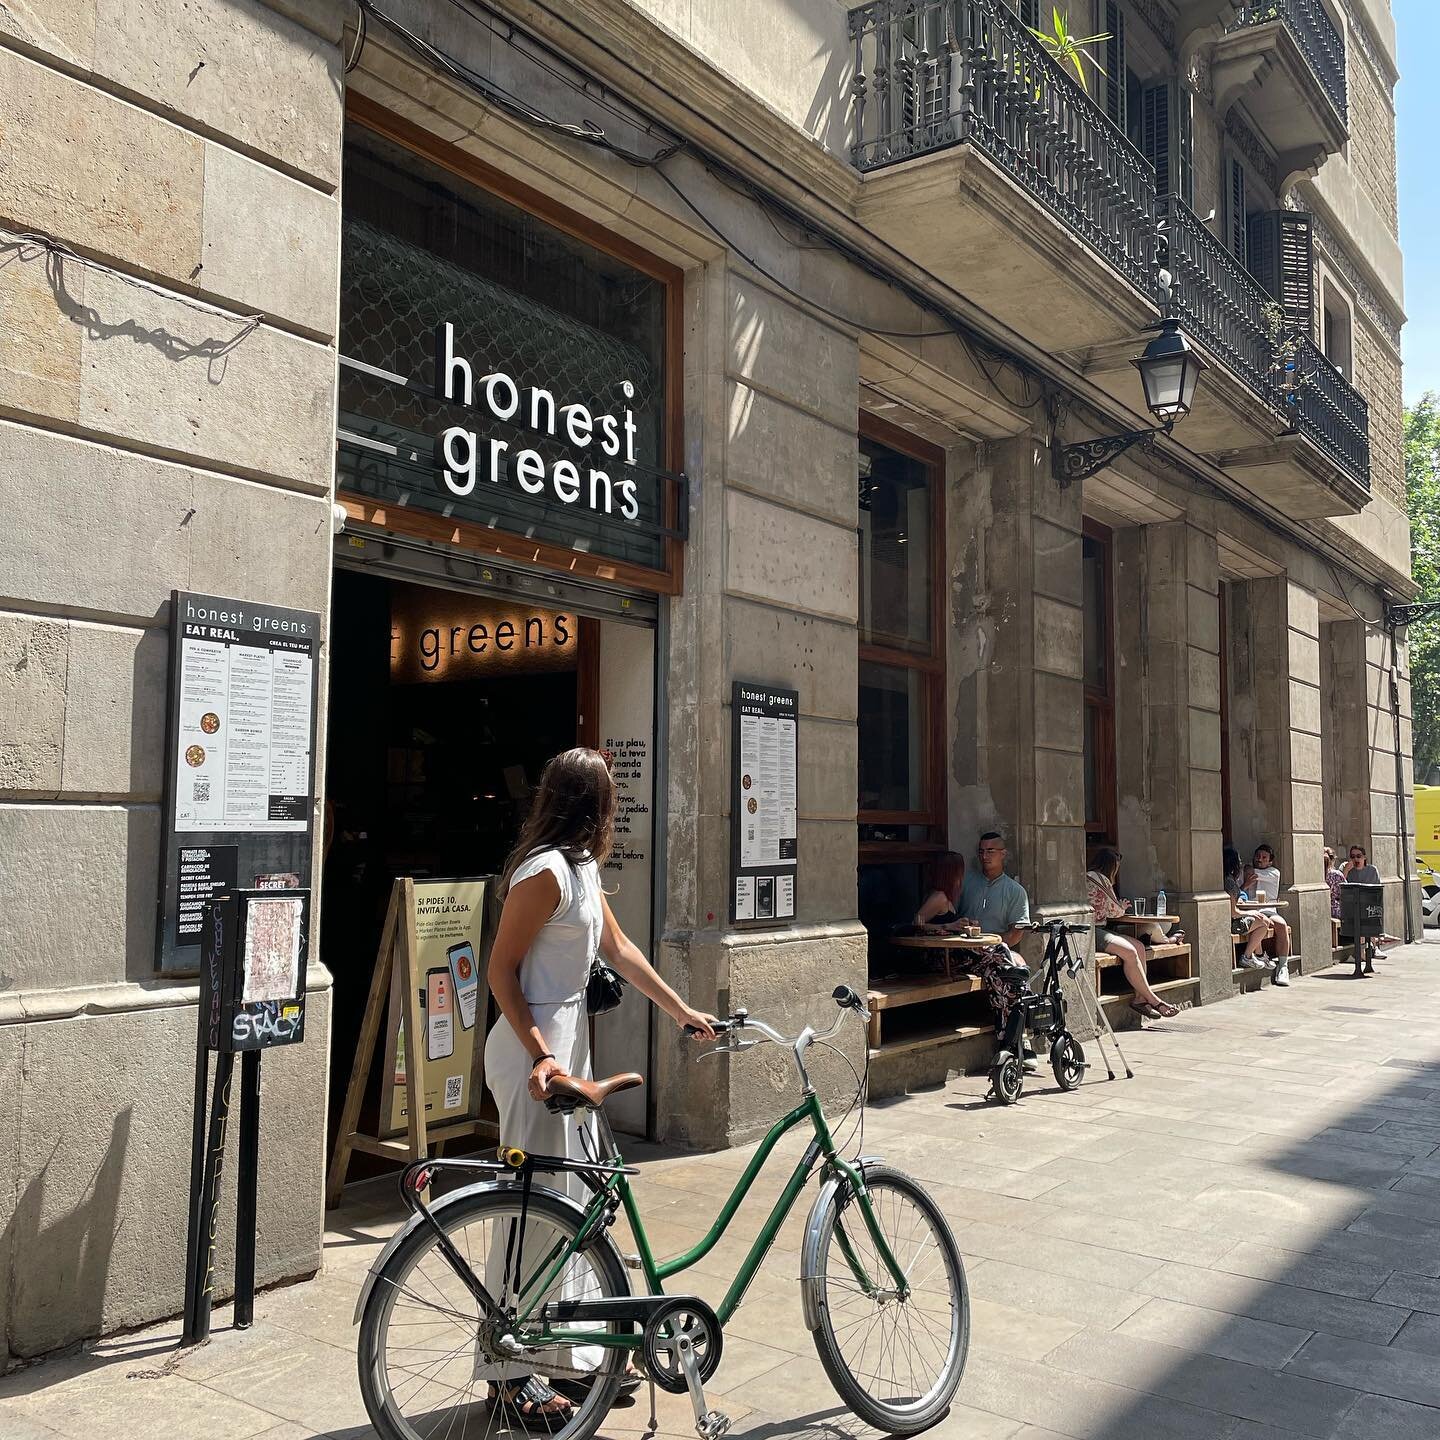 ⚡️ GREEN BIKES TIP ⚡️ 

While cycling through Barcelona, want to take a break and have lunch somewhere? One of Green Bikes&rsquo; favourite spots is the restaurant @honestgreens 🌱 

The El Born location is highly recommended because it features a lo